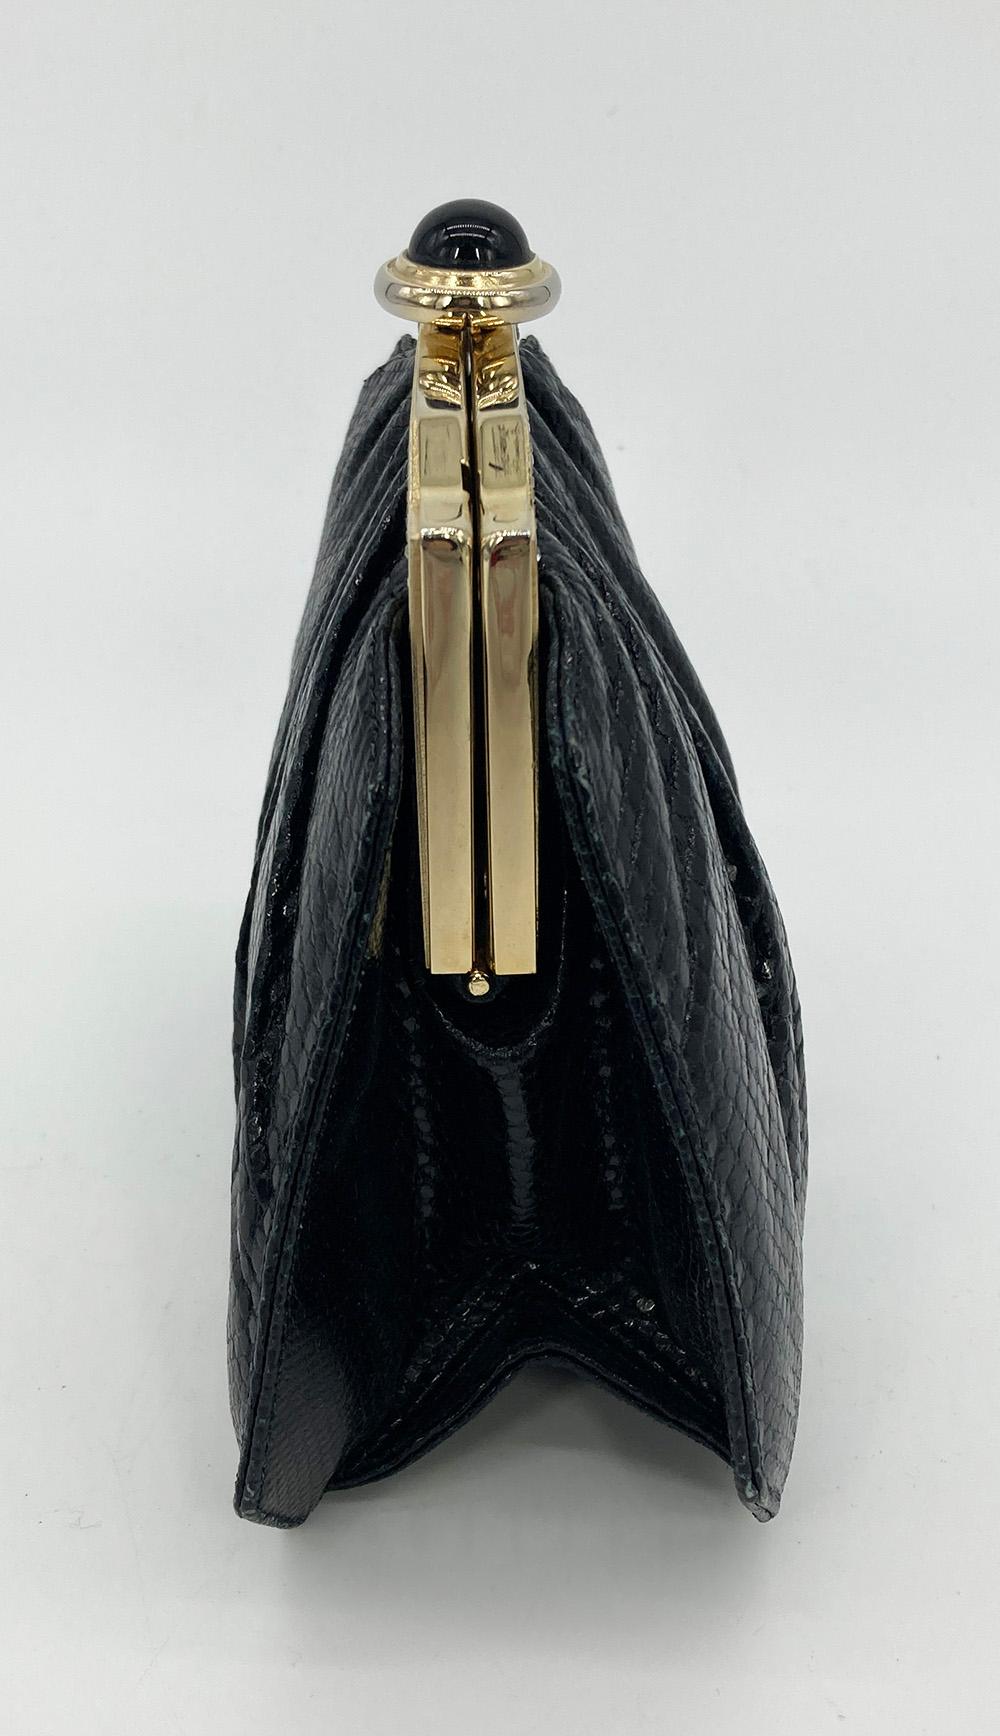 Judith Leiber Black Lizard Enamel Top Clutch in good vintage condition. Black lizard leather exterior trimmed with swarovski crystals, gold hardware and black and yellow enamel top edge. Top lift button closure opens to a black satin lined interior